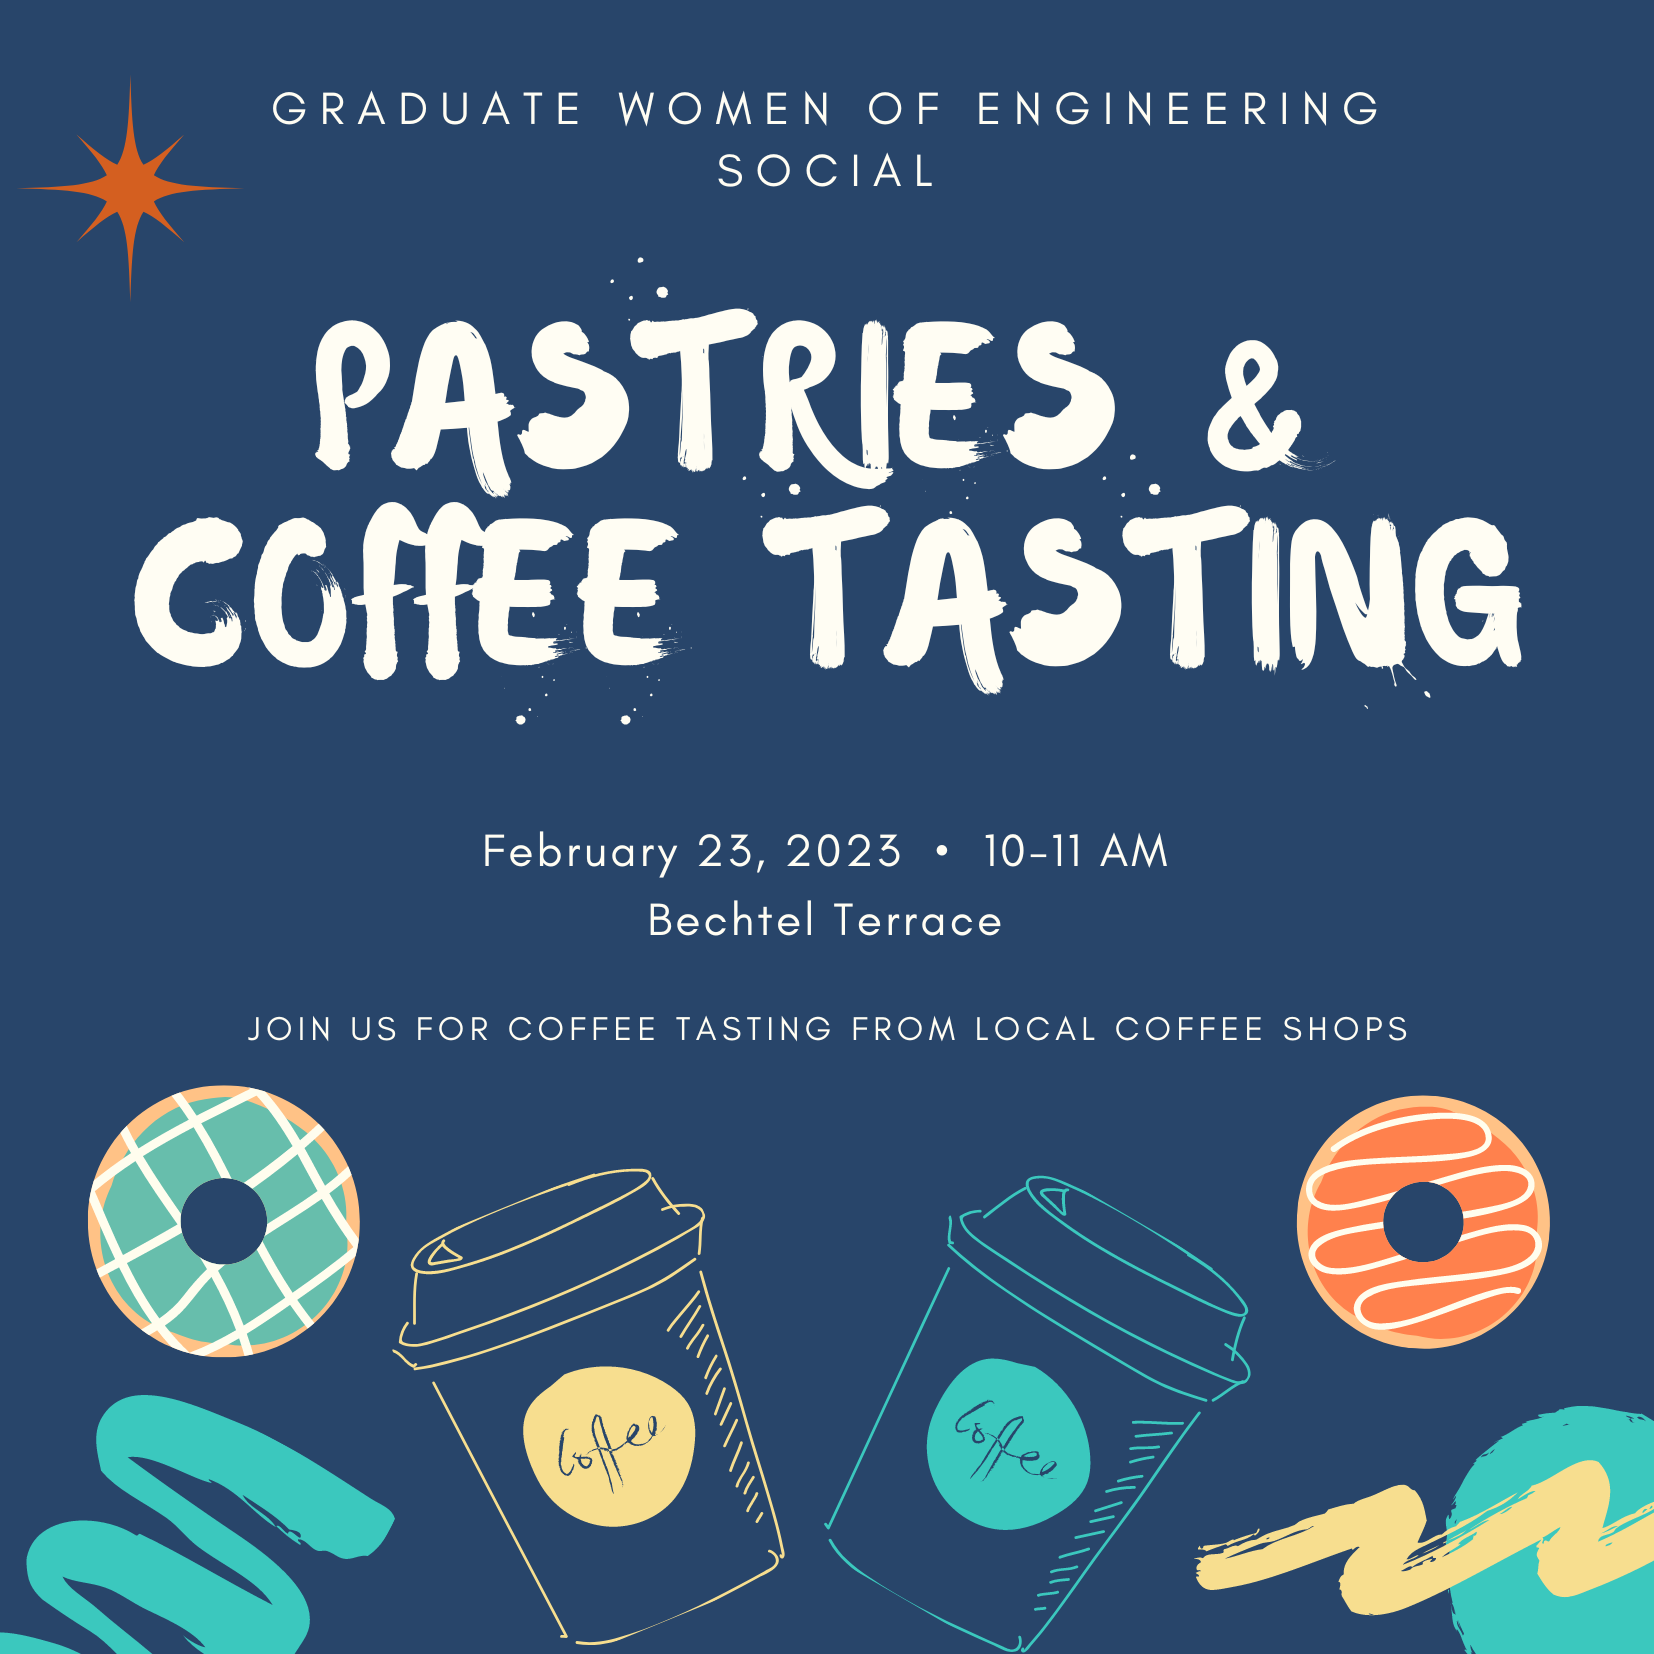 Flyer for Coffee and pastry tasting social